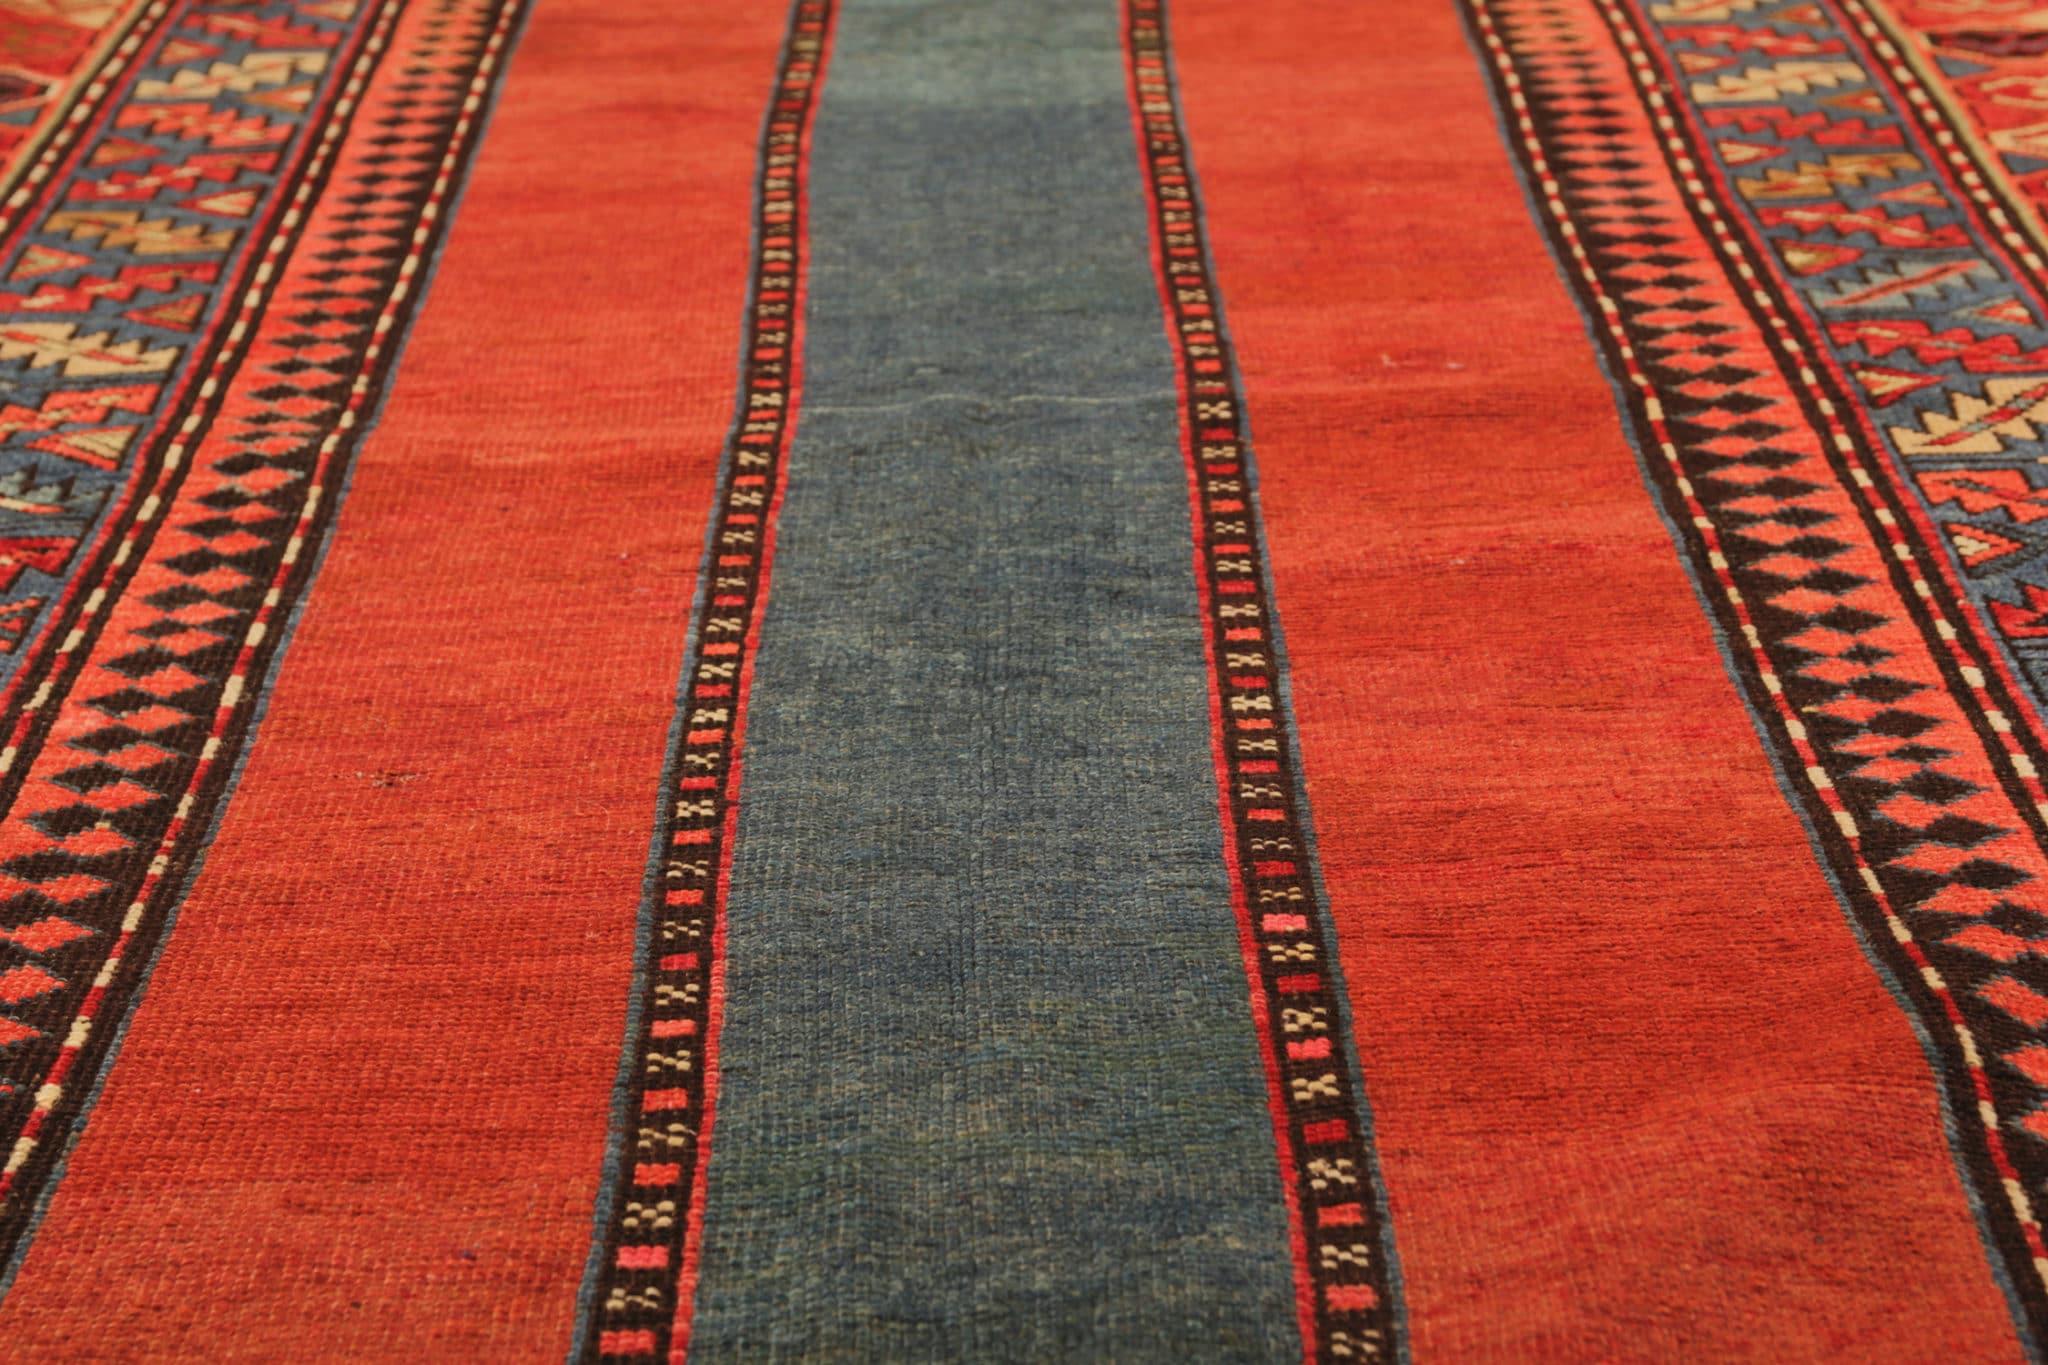 This rare antique rug from the Talesh area is a true masterpiece, boasting exquisite craftsmanship and timeless beauty. Hand-knotted with precision and care, this rug showcases the traditional weaving techniques of the region, making it a valuable